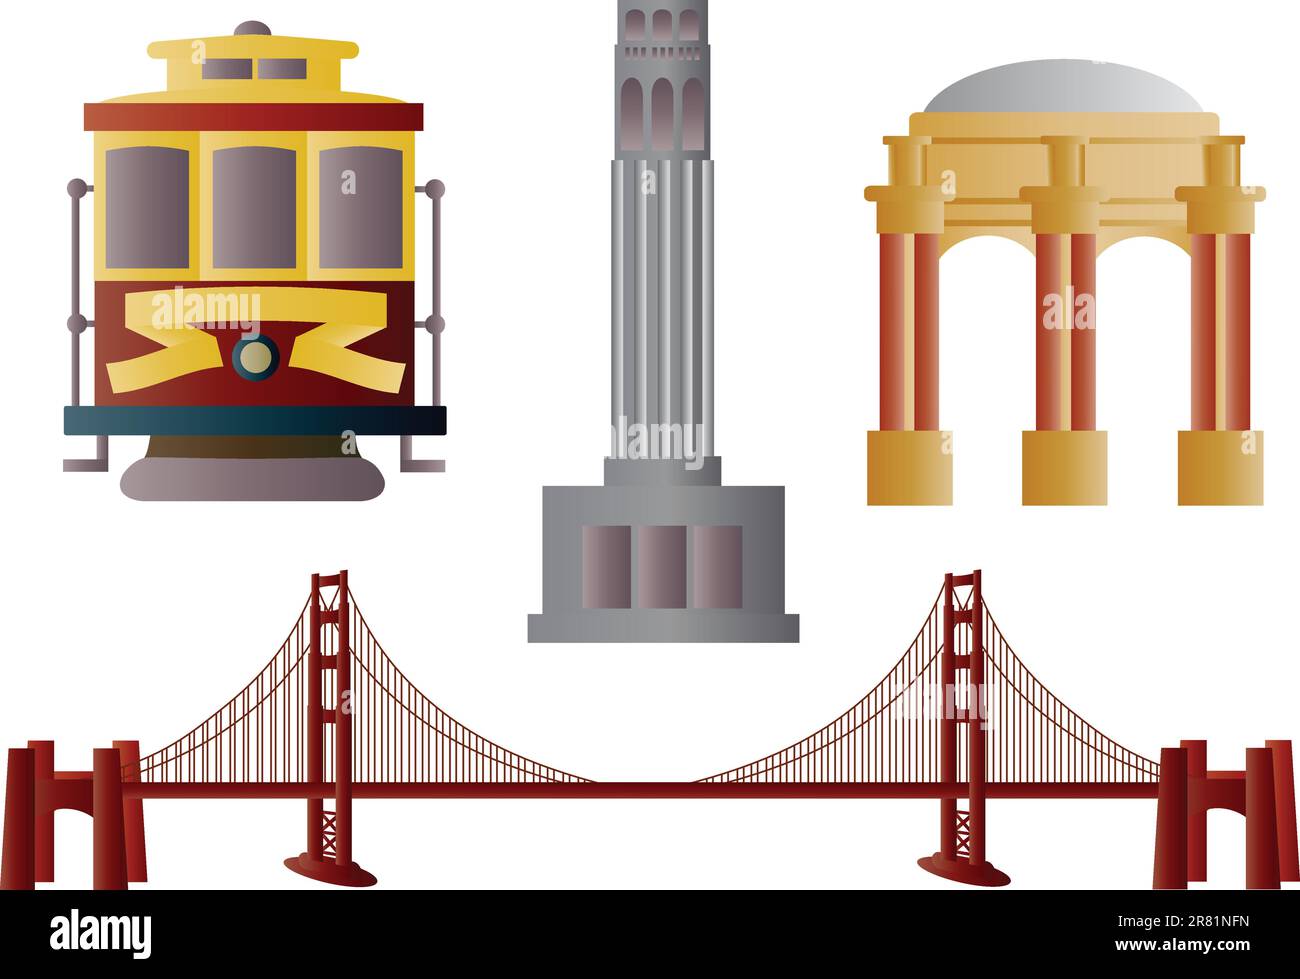 San Francisco Golden Gate Bridge Trolley Coit Tower and Palace of Fine Arts Illustration Stock Vector